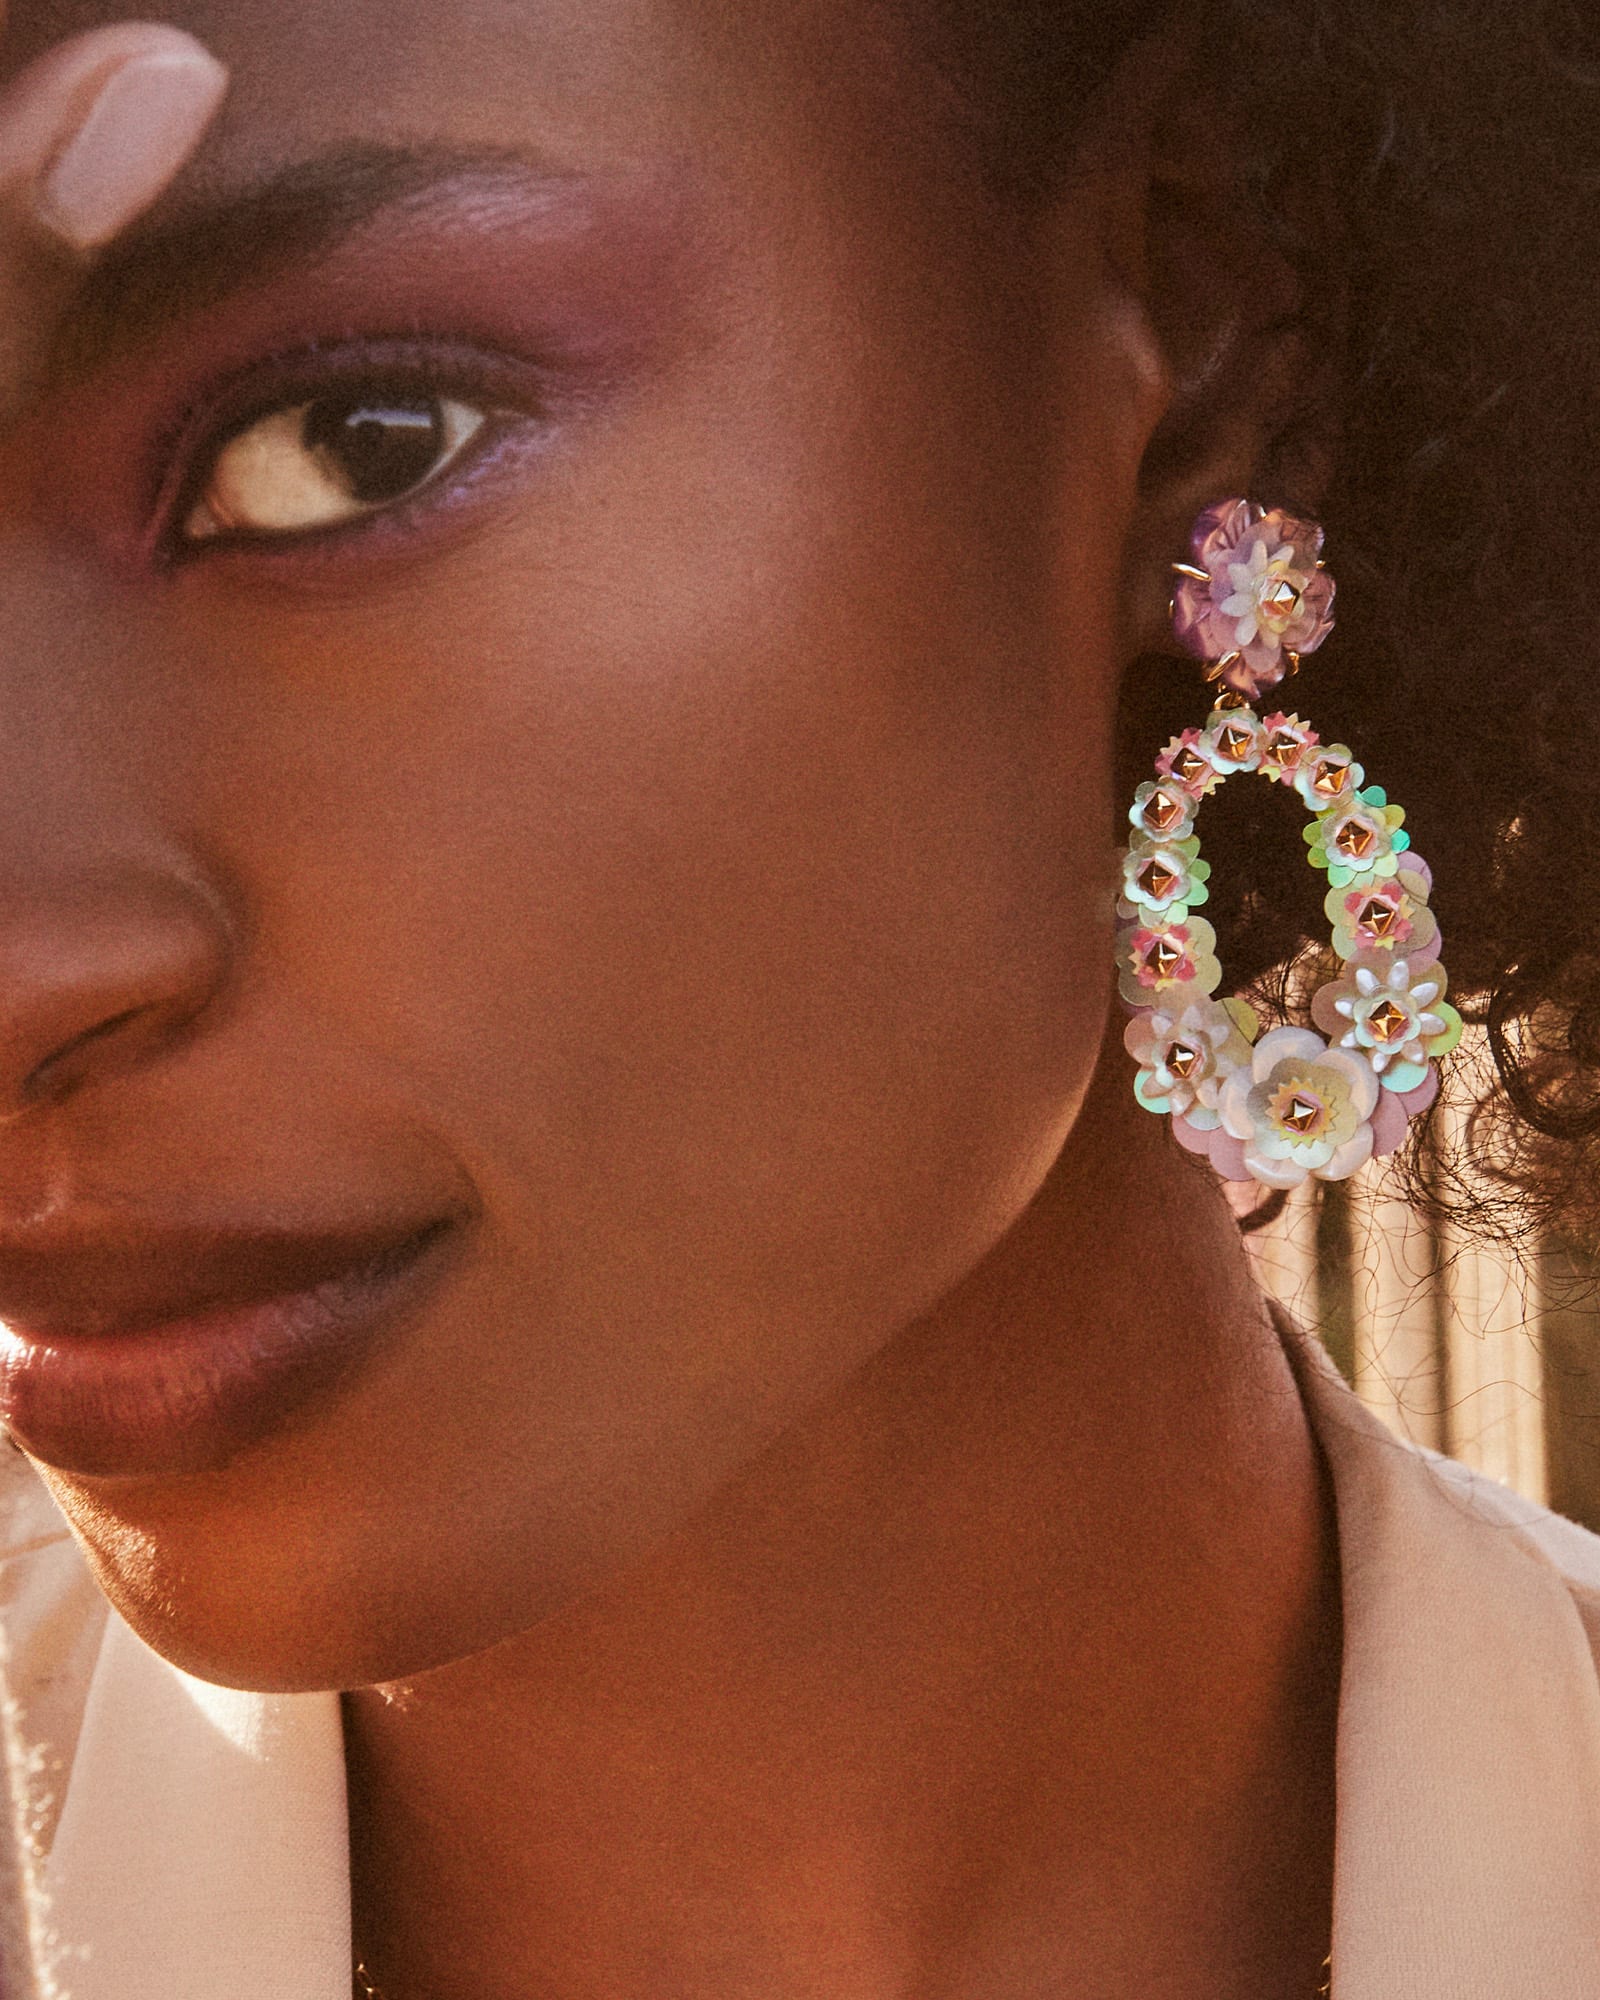 Deliah Convertible Gold Statement Earrings in Pastel Mix